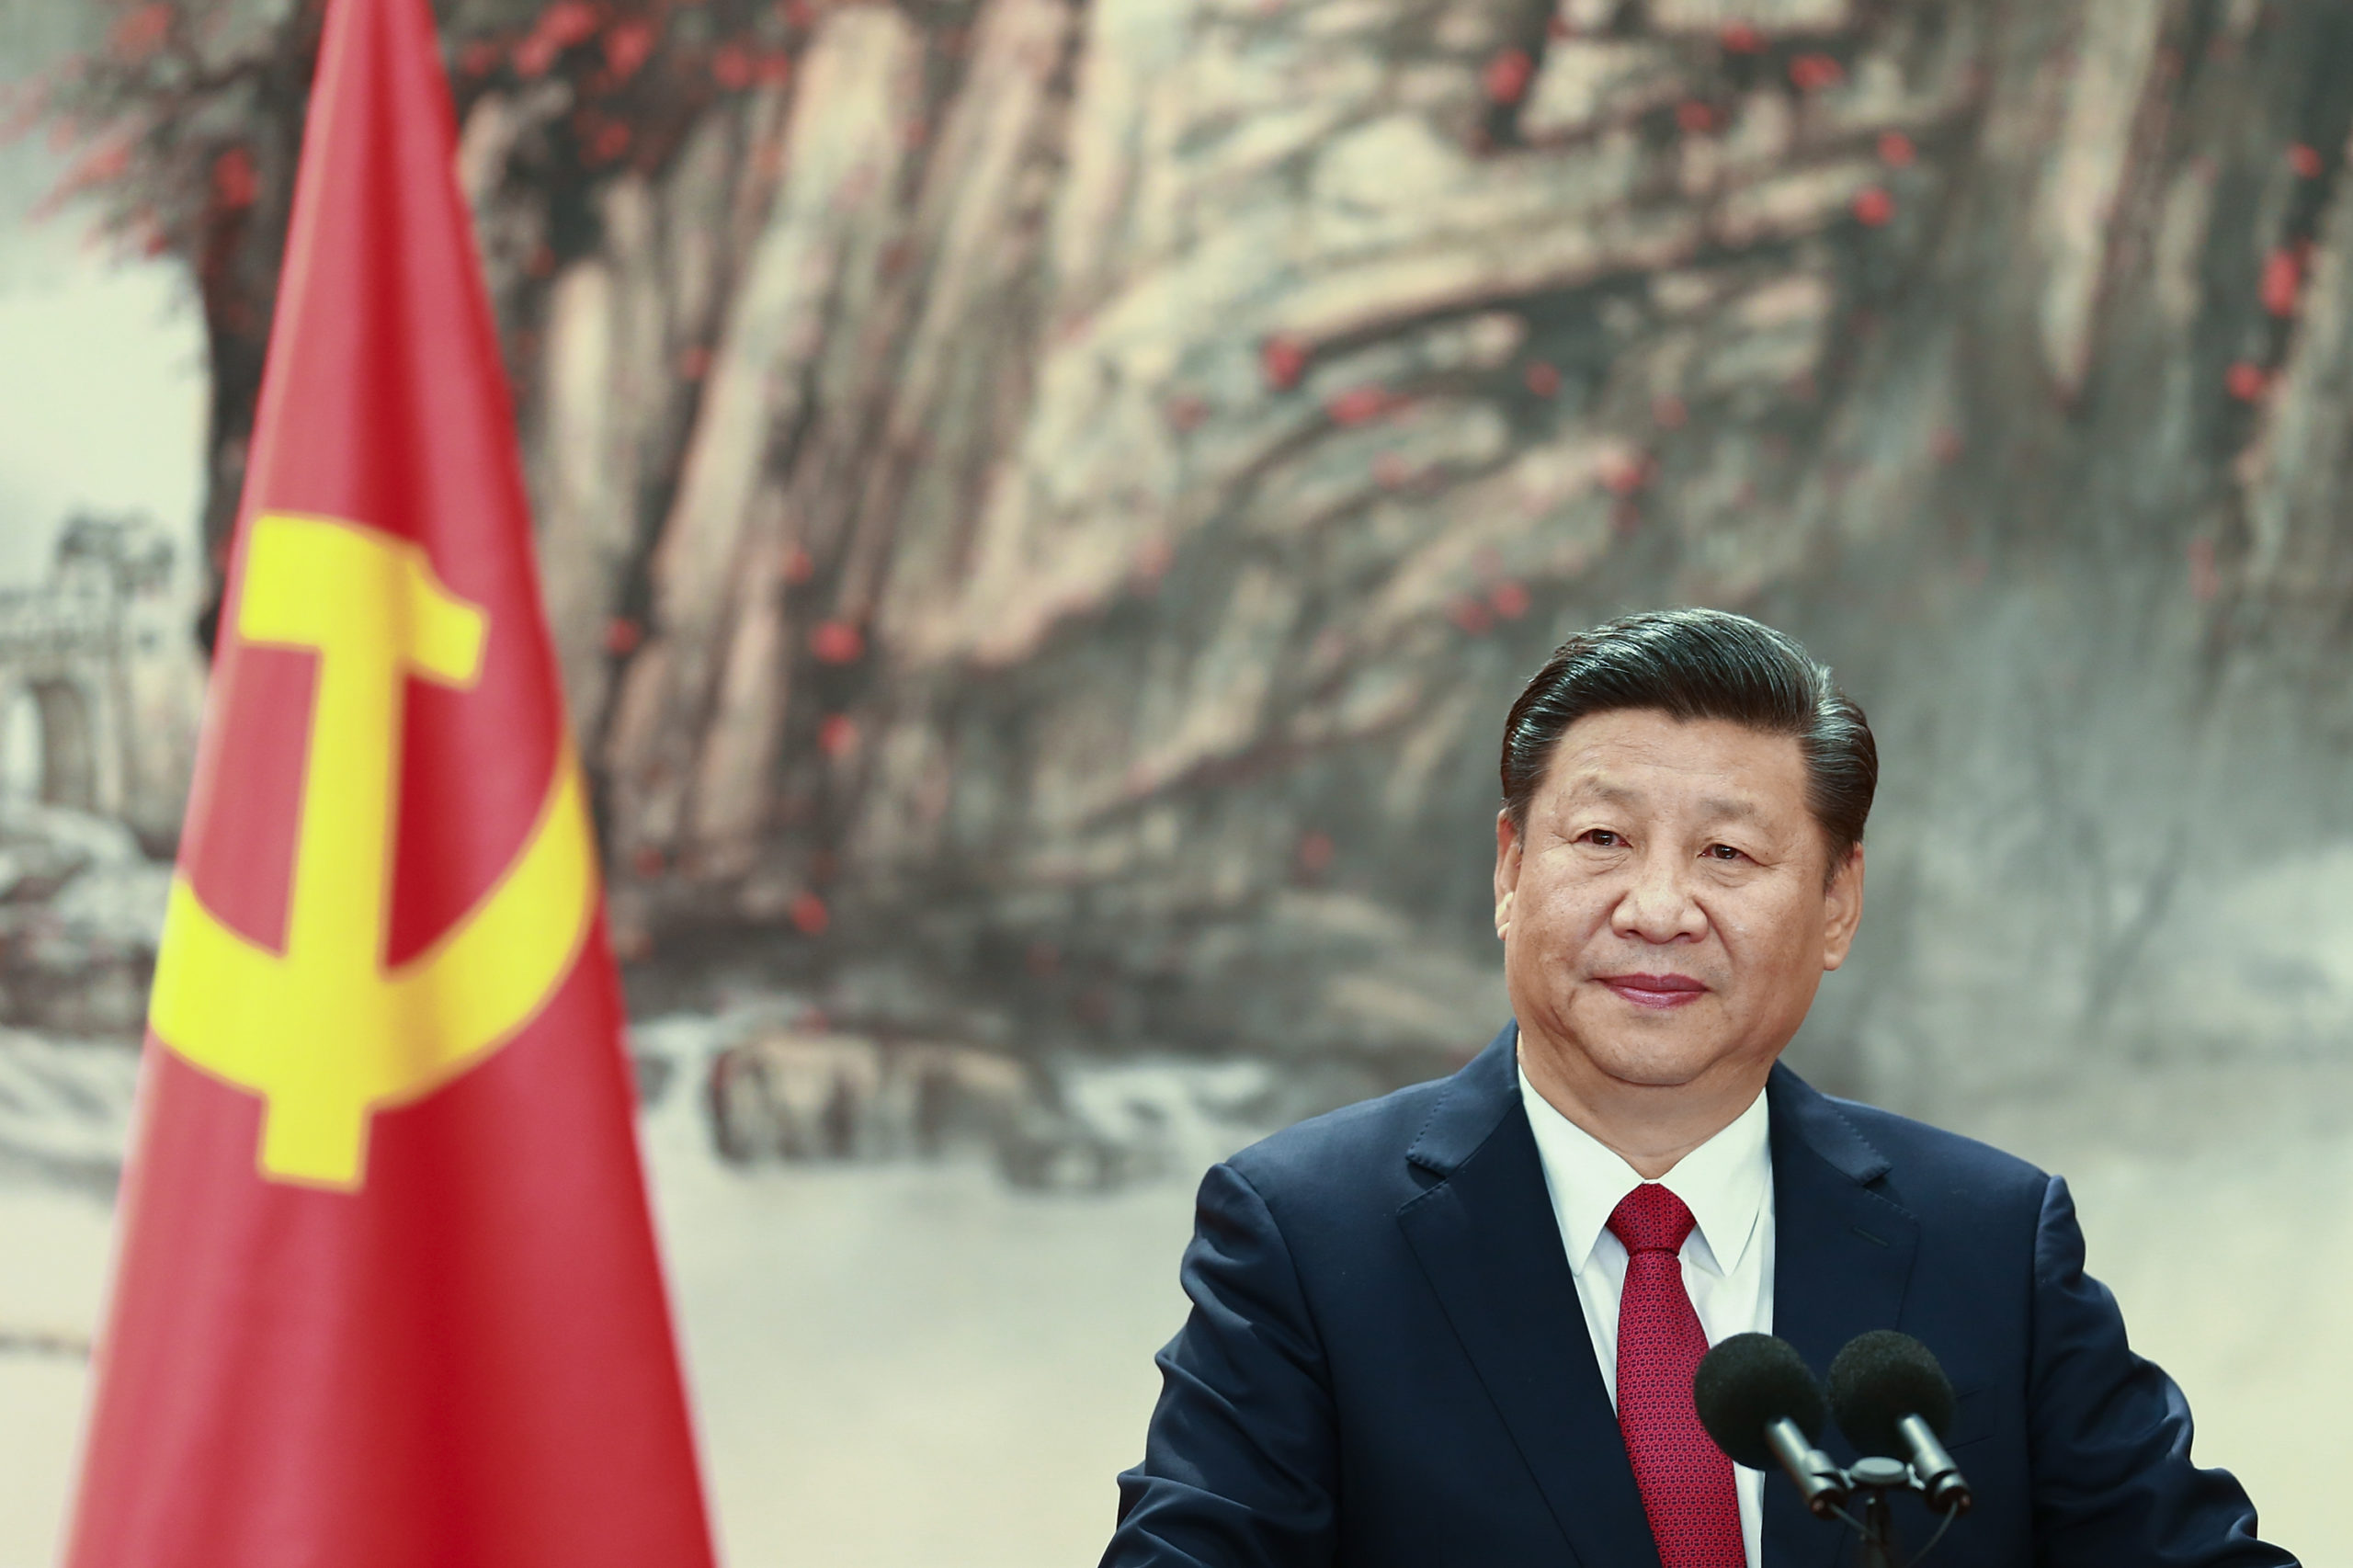 BEIJING, CHINA - OCTOBER 25: Chinese President Xi Jinping speaks at the podium during the unveiling of the Communist Party's new Politburo Standing Committee at the Great Hall of the People on October 25, 2017 in Beijing, China. China's ruling Communist Party today revealed the new Politburo Standing Committee after its 19th congress. (Photo by Lintao Zhang/Getty Images)